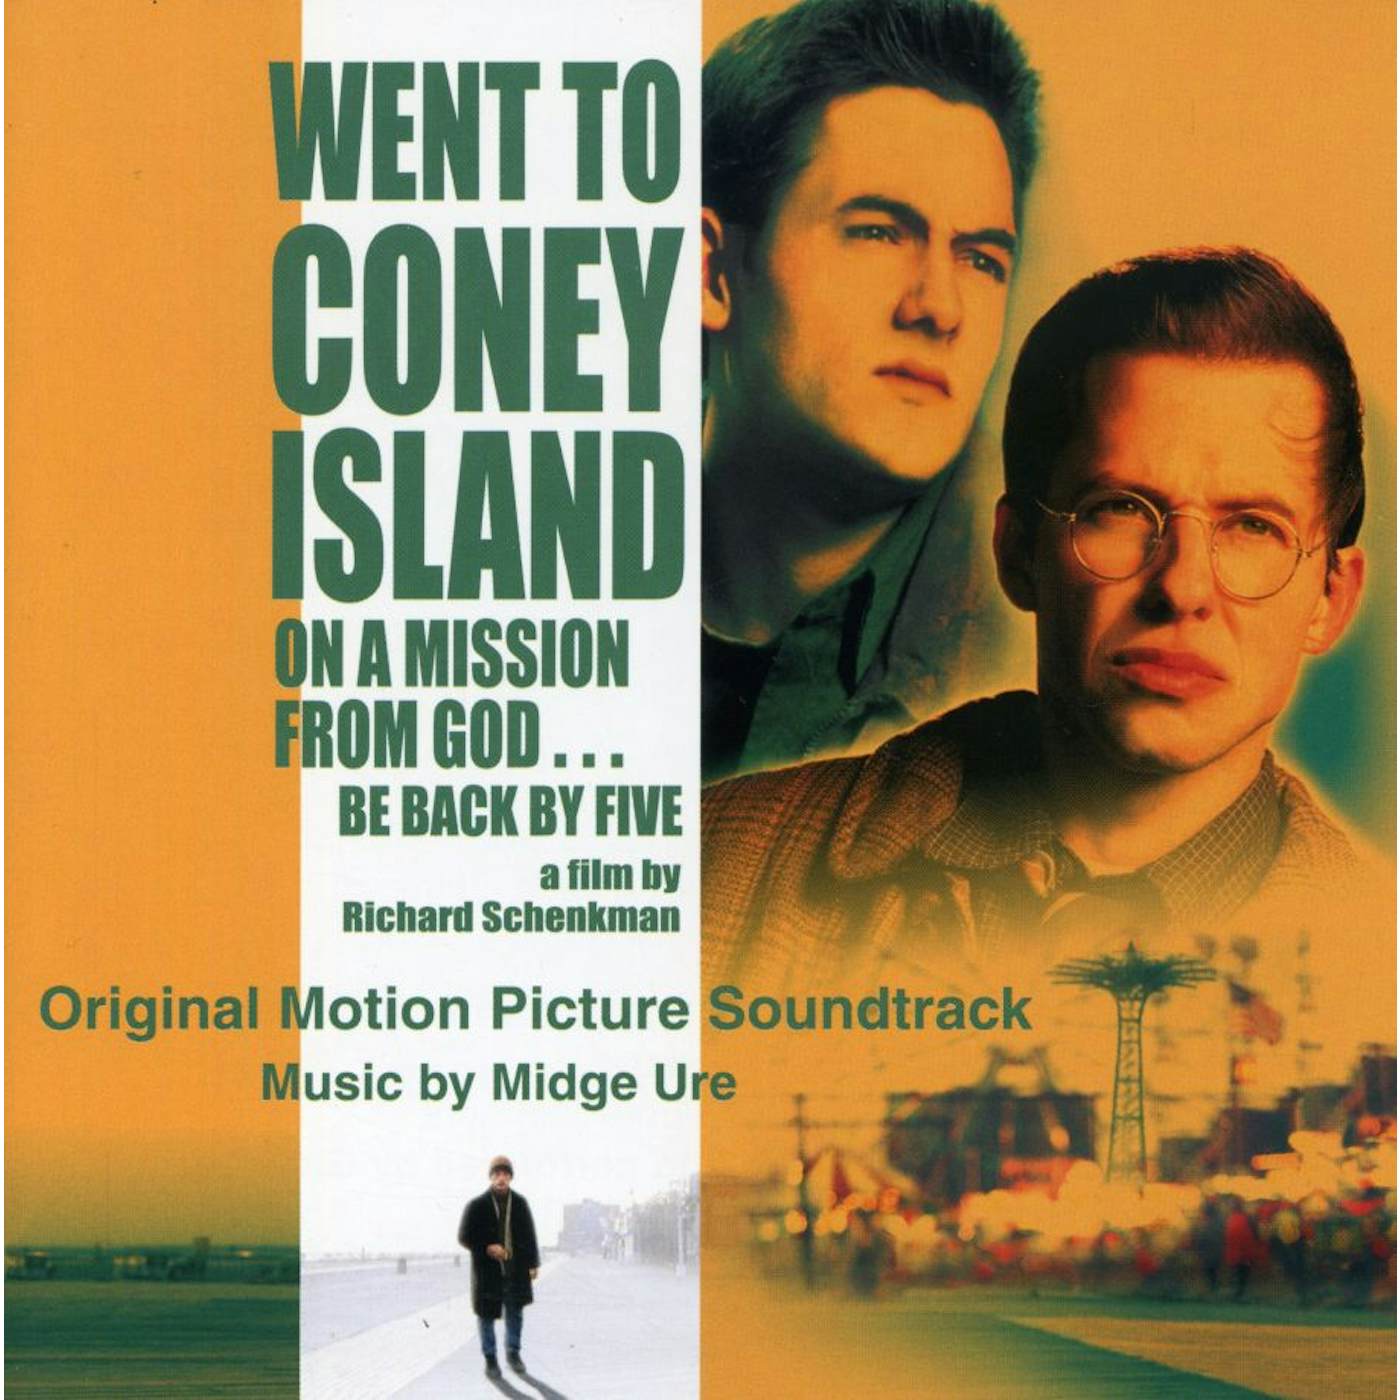 Midge Ure WENT TO CONEY ISLAND ON MISSION FROM GOD - Original Soundtrack CD